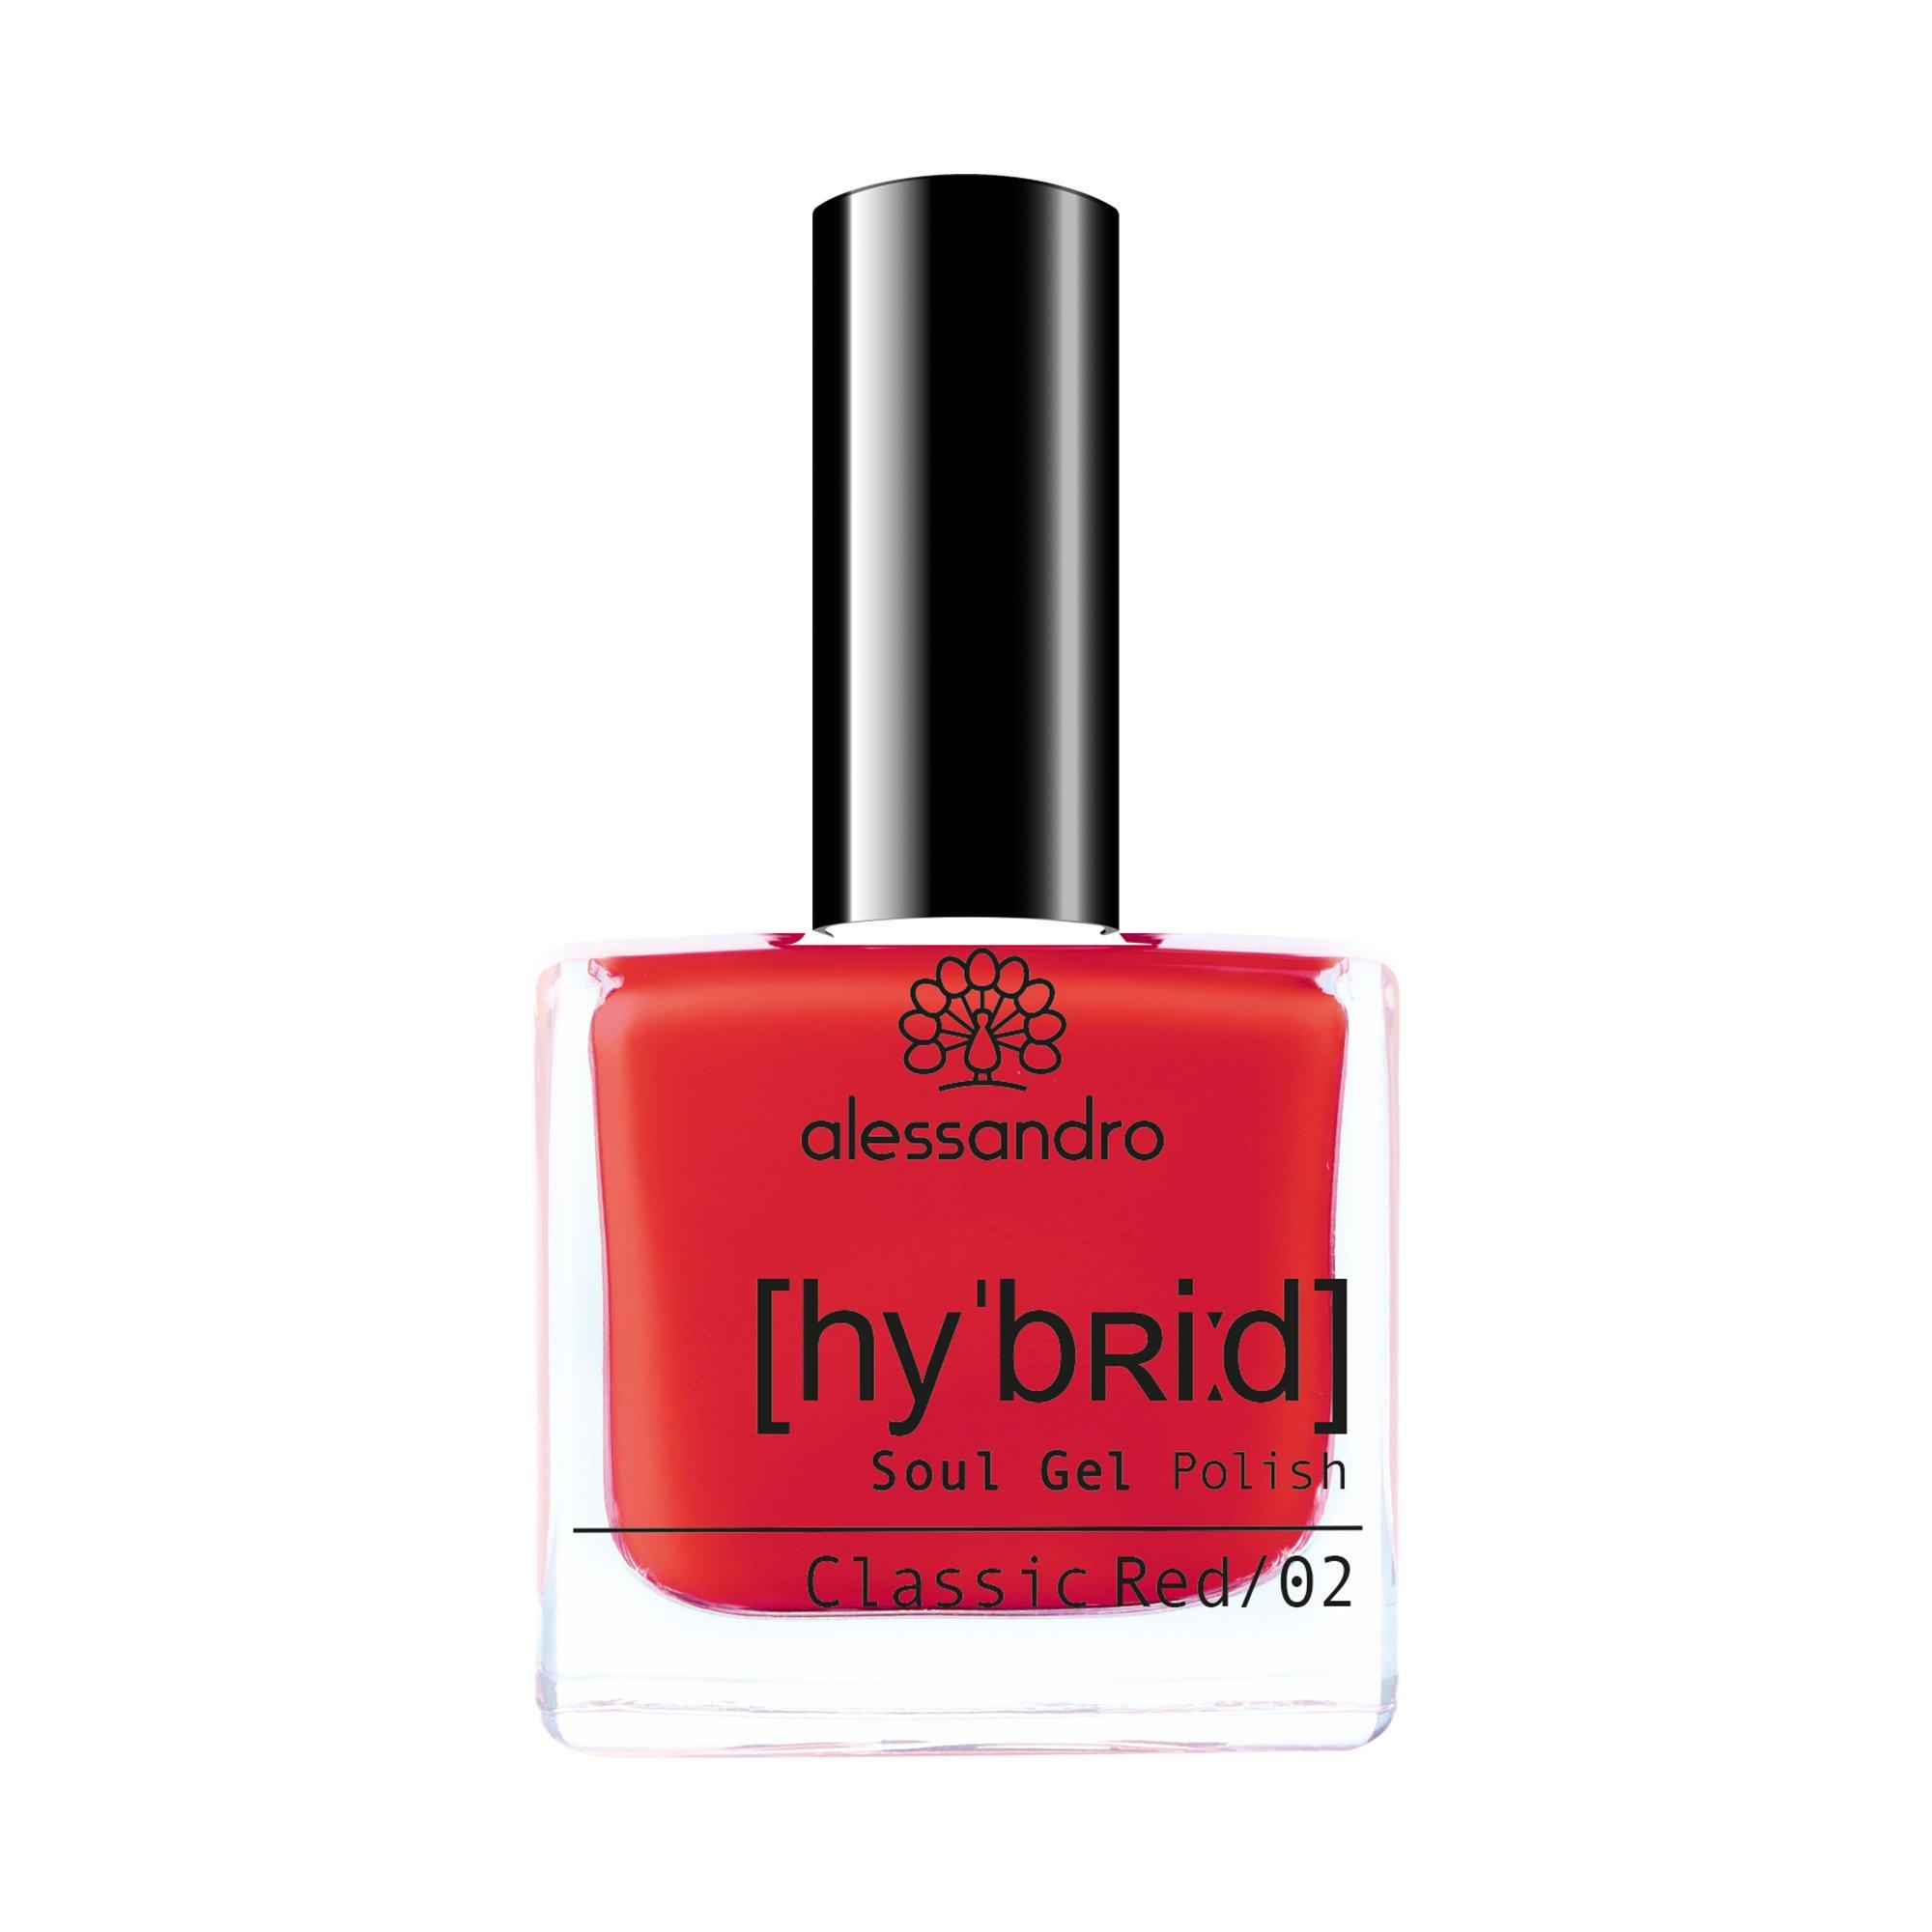 Image of alessandro Hybrid Classic Red - 8ml